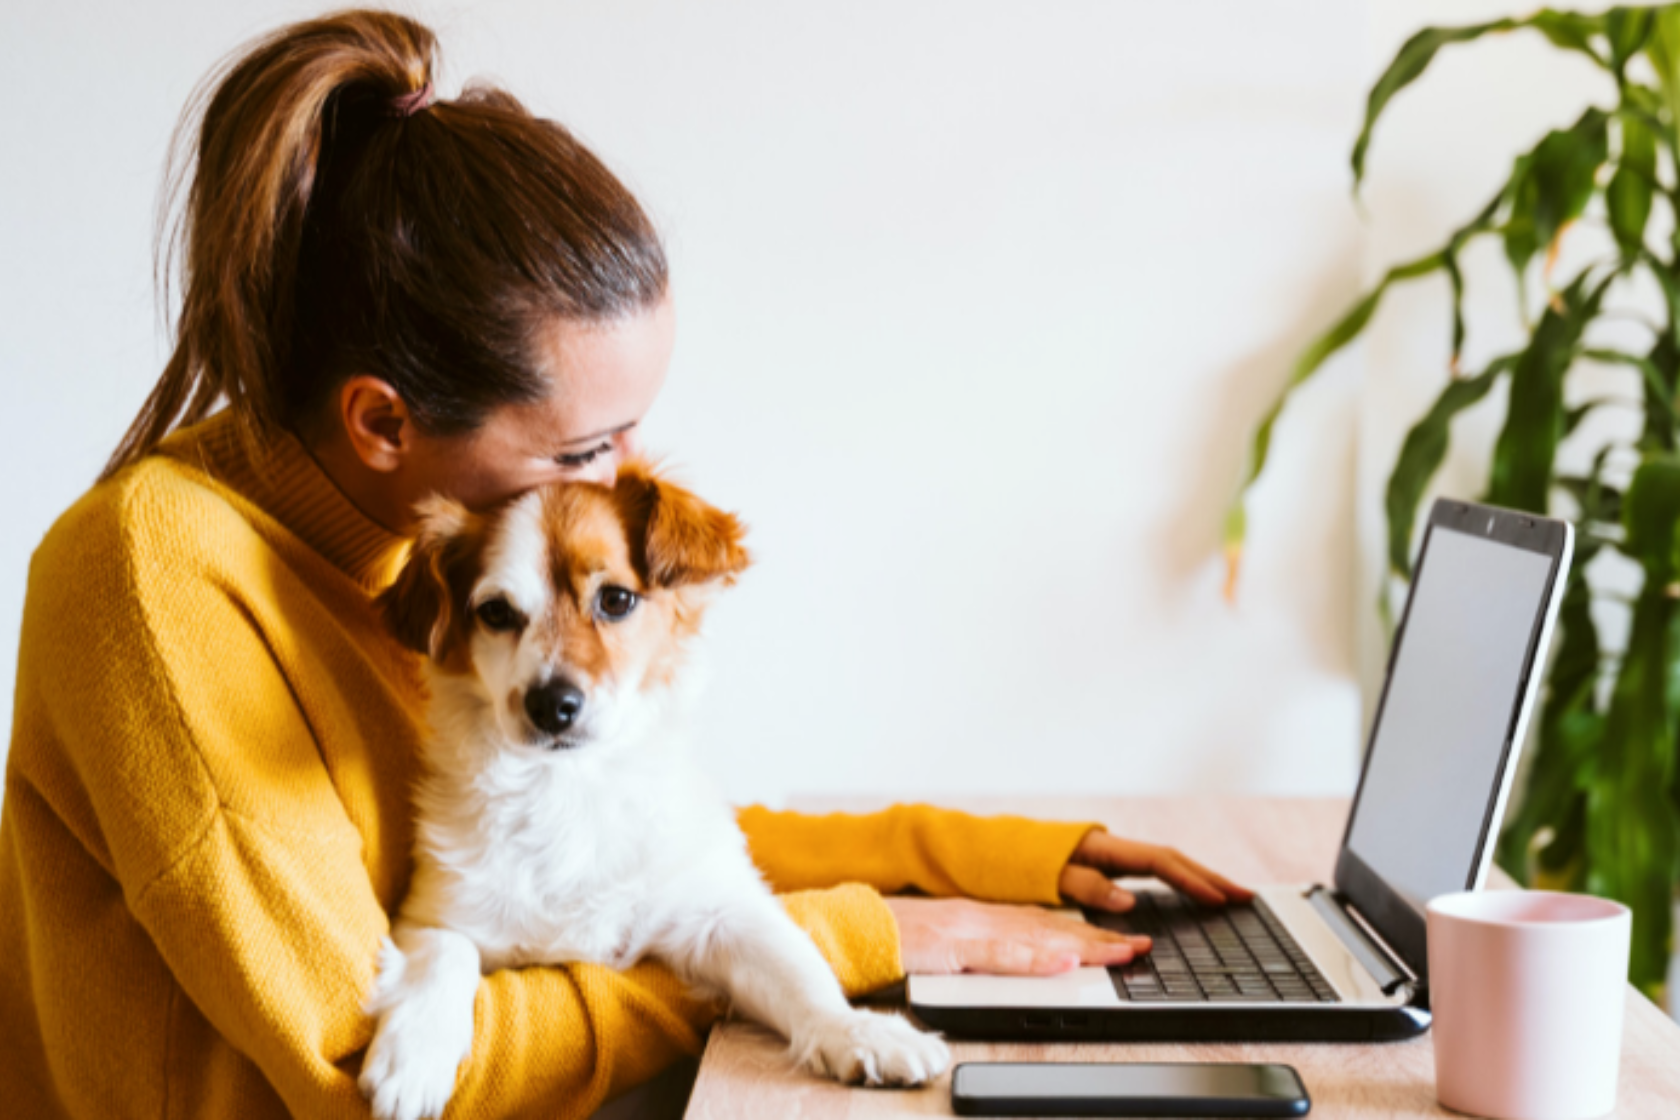 Woman working on laptop while holding her dog